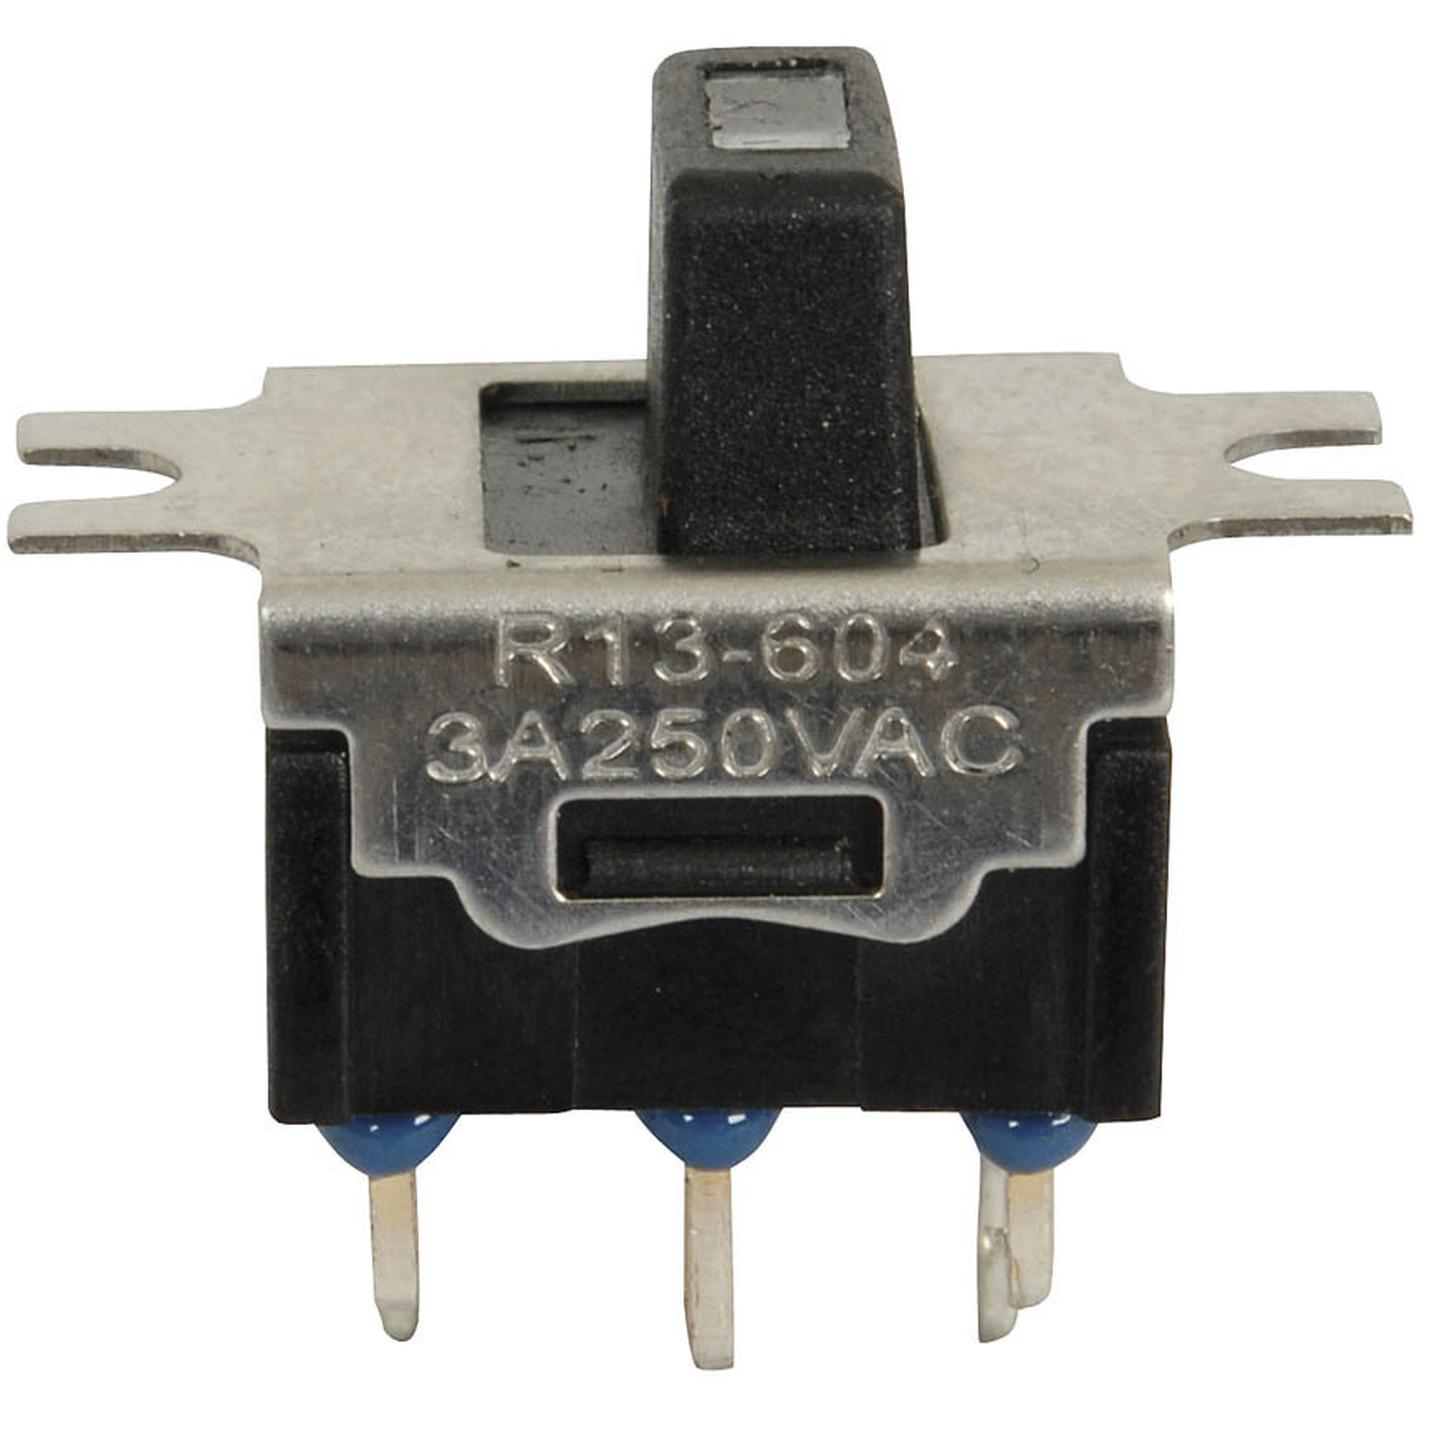 SPDT Slide Switch with LED Illumination in Actuator